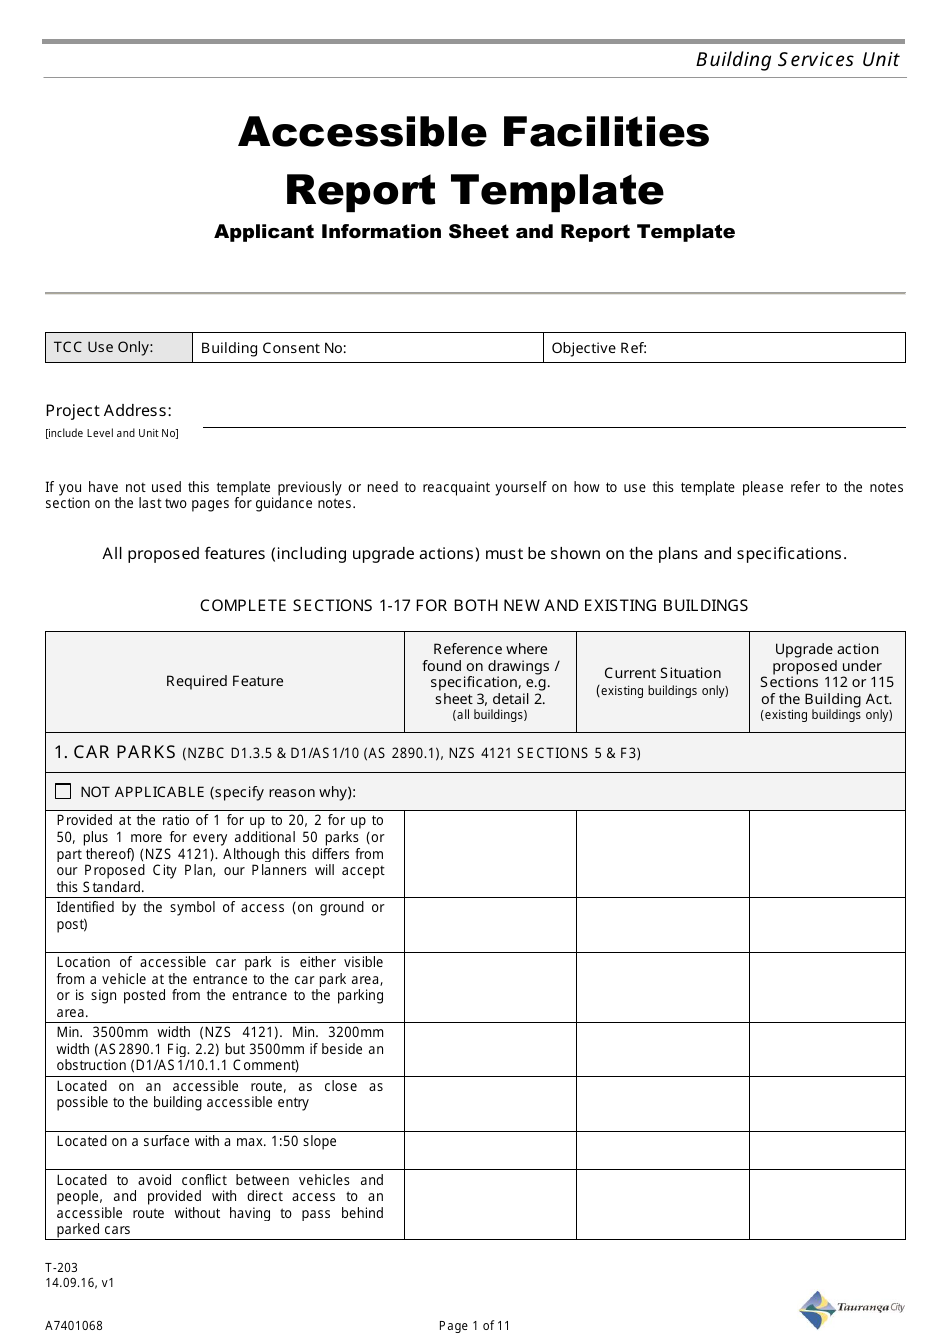 Form T-203 (A7401068) Accessible Facilities Report Template - Tauranga City, Bay of Plenty, New Zealand, Page 1